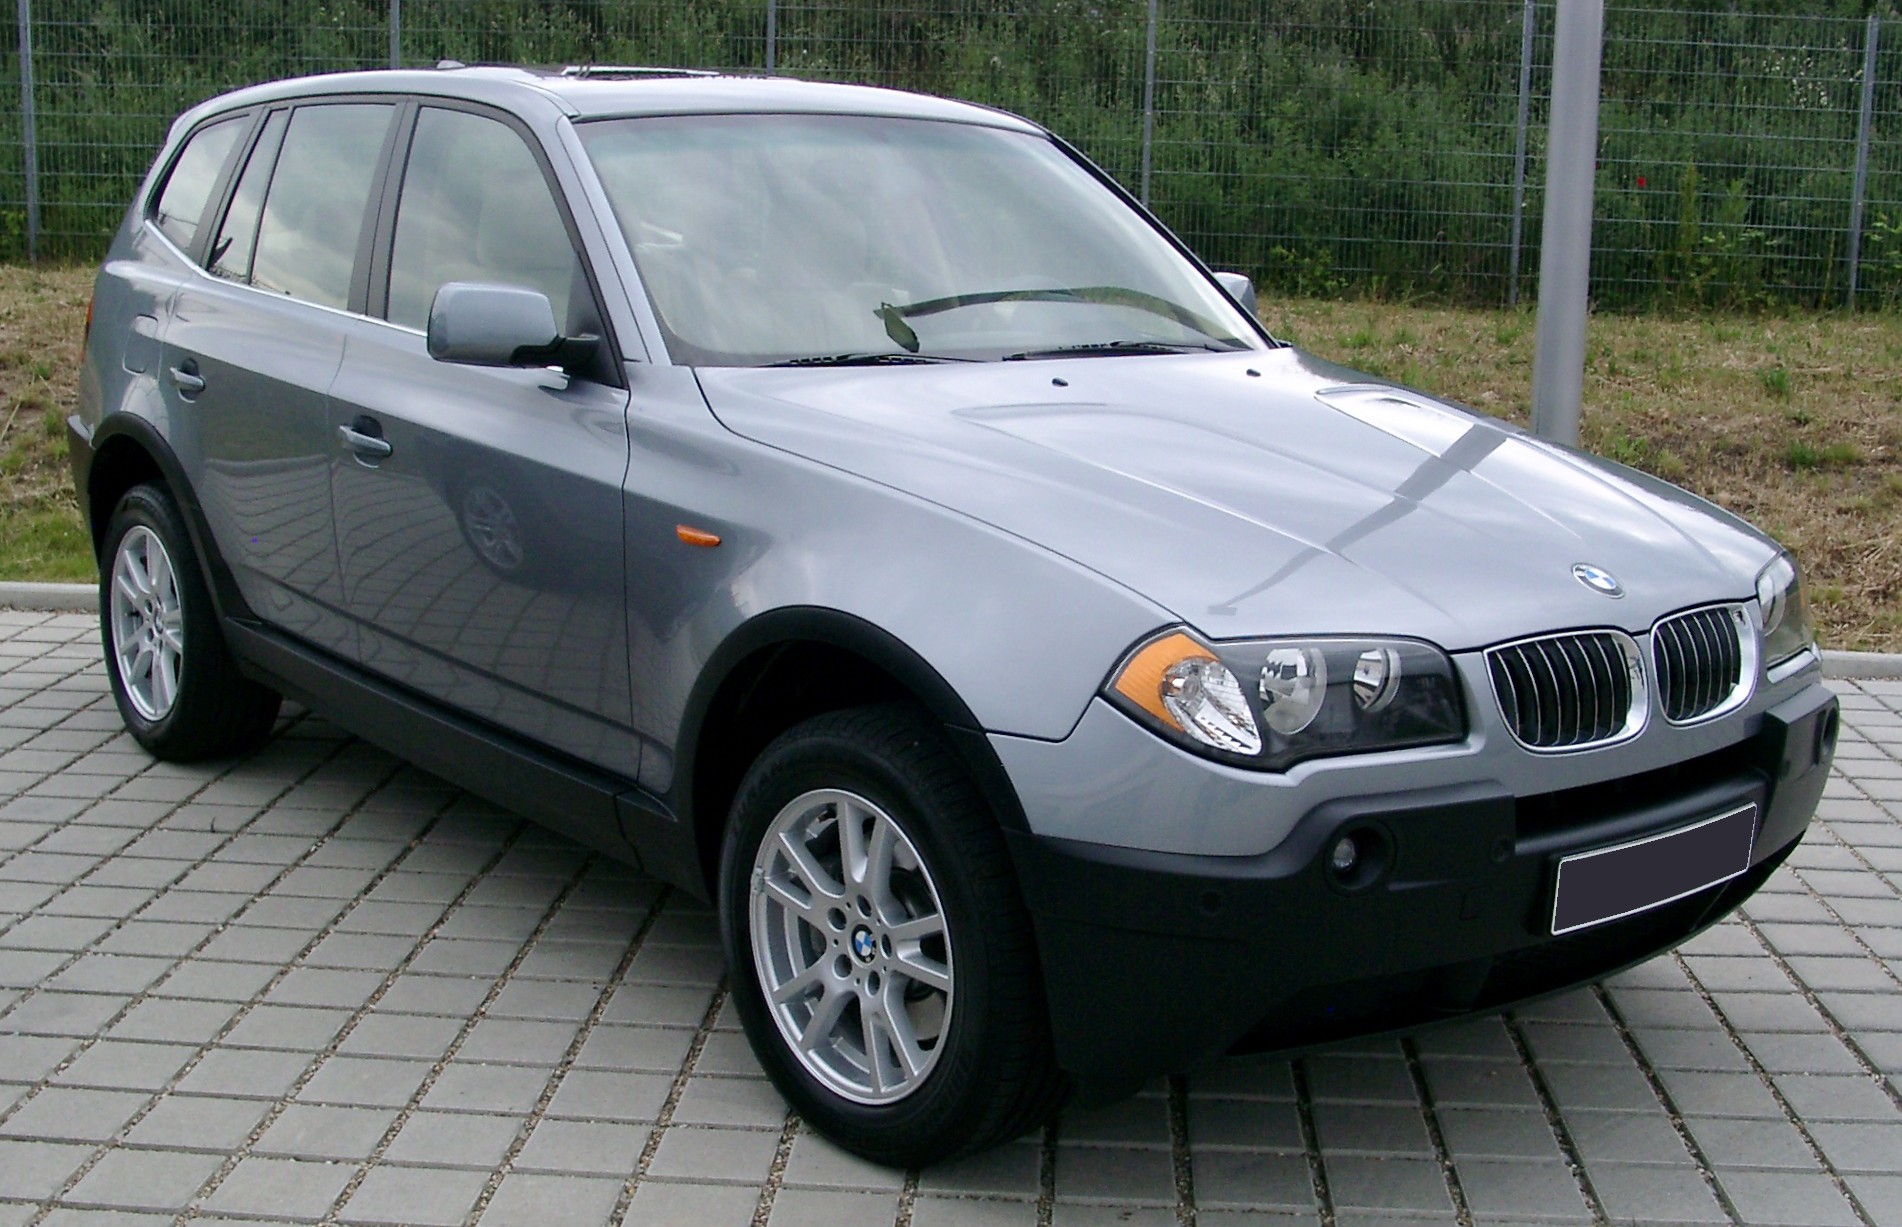 https://static.wikia.nocookie.net/tractors/images/e/e3/BMW_X3_front_20080524.jpg/revision/latest?cb=20110503195135